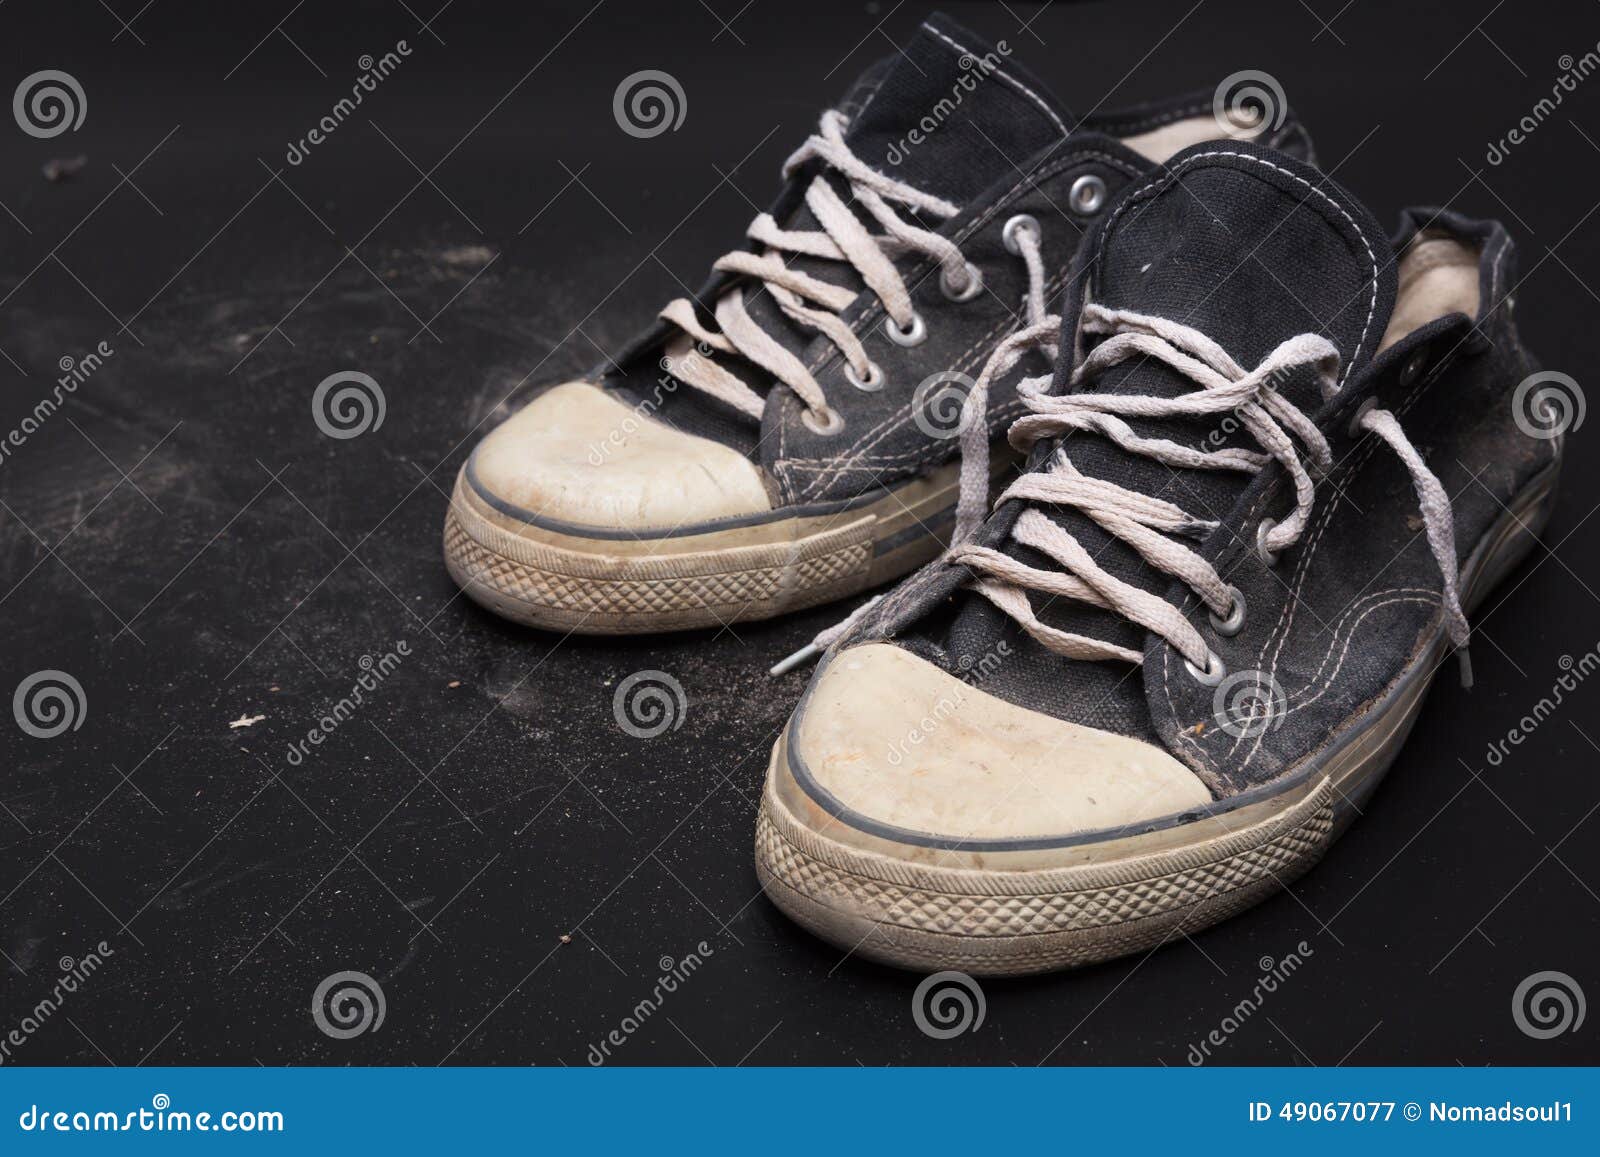 Sports Trainers on the Floor Stock Image - Image of running, equipment ...